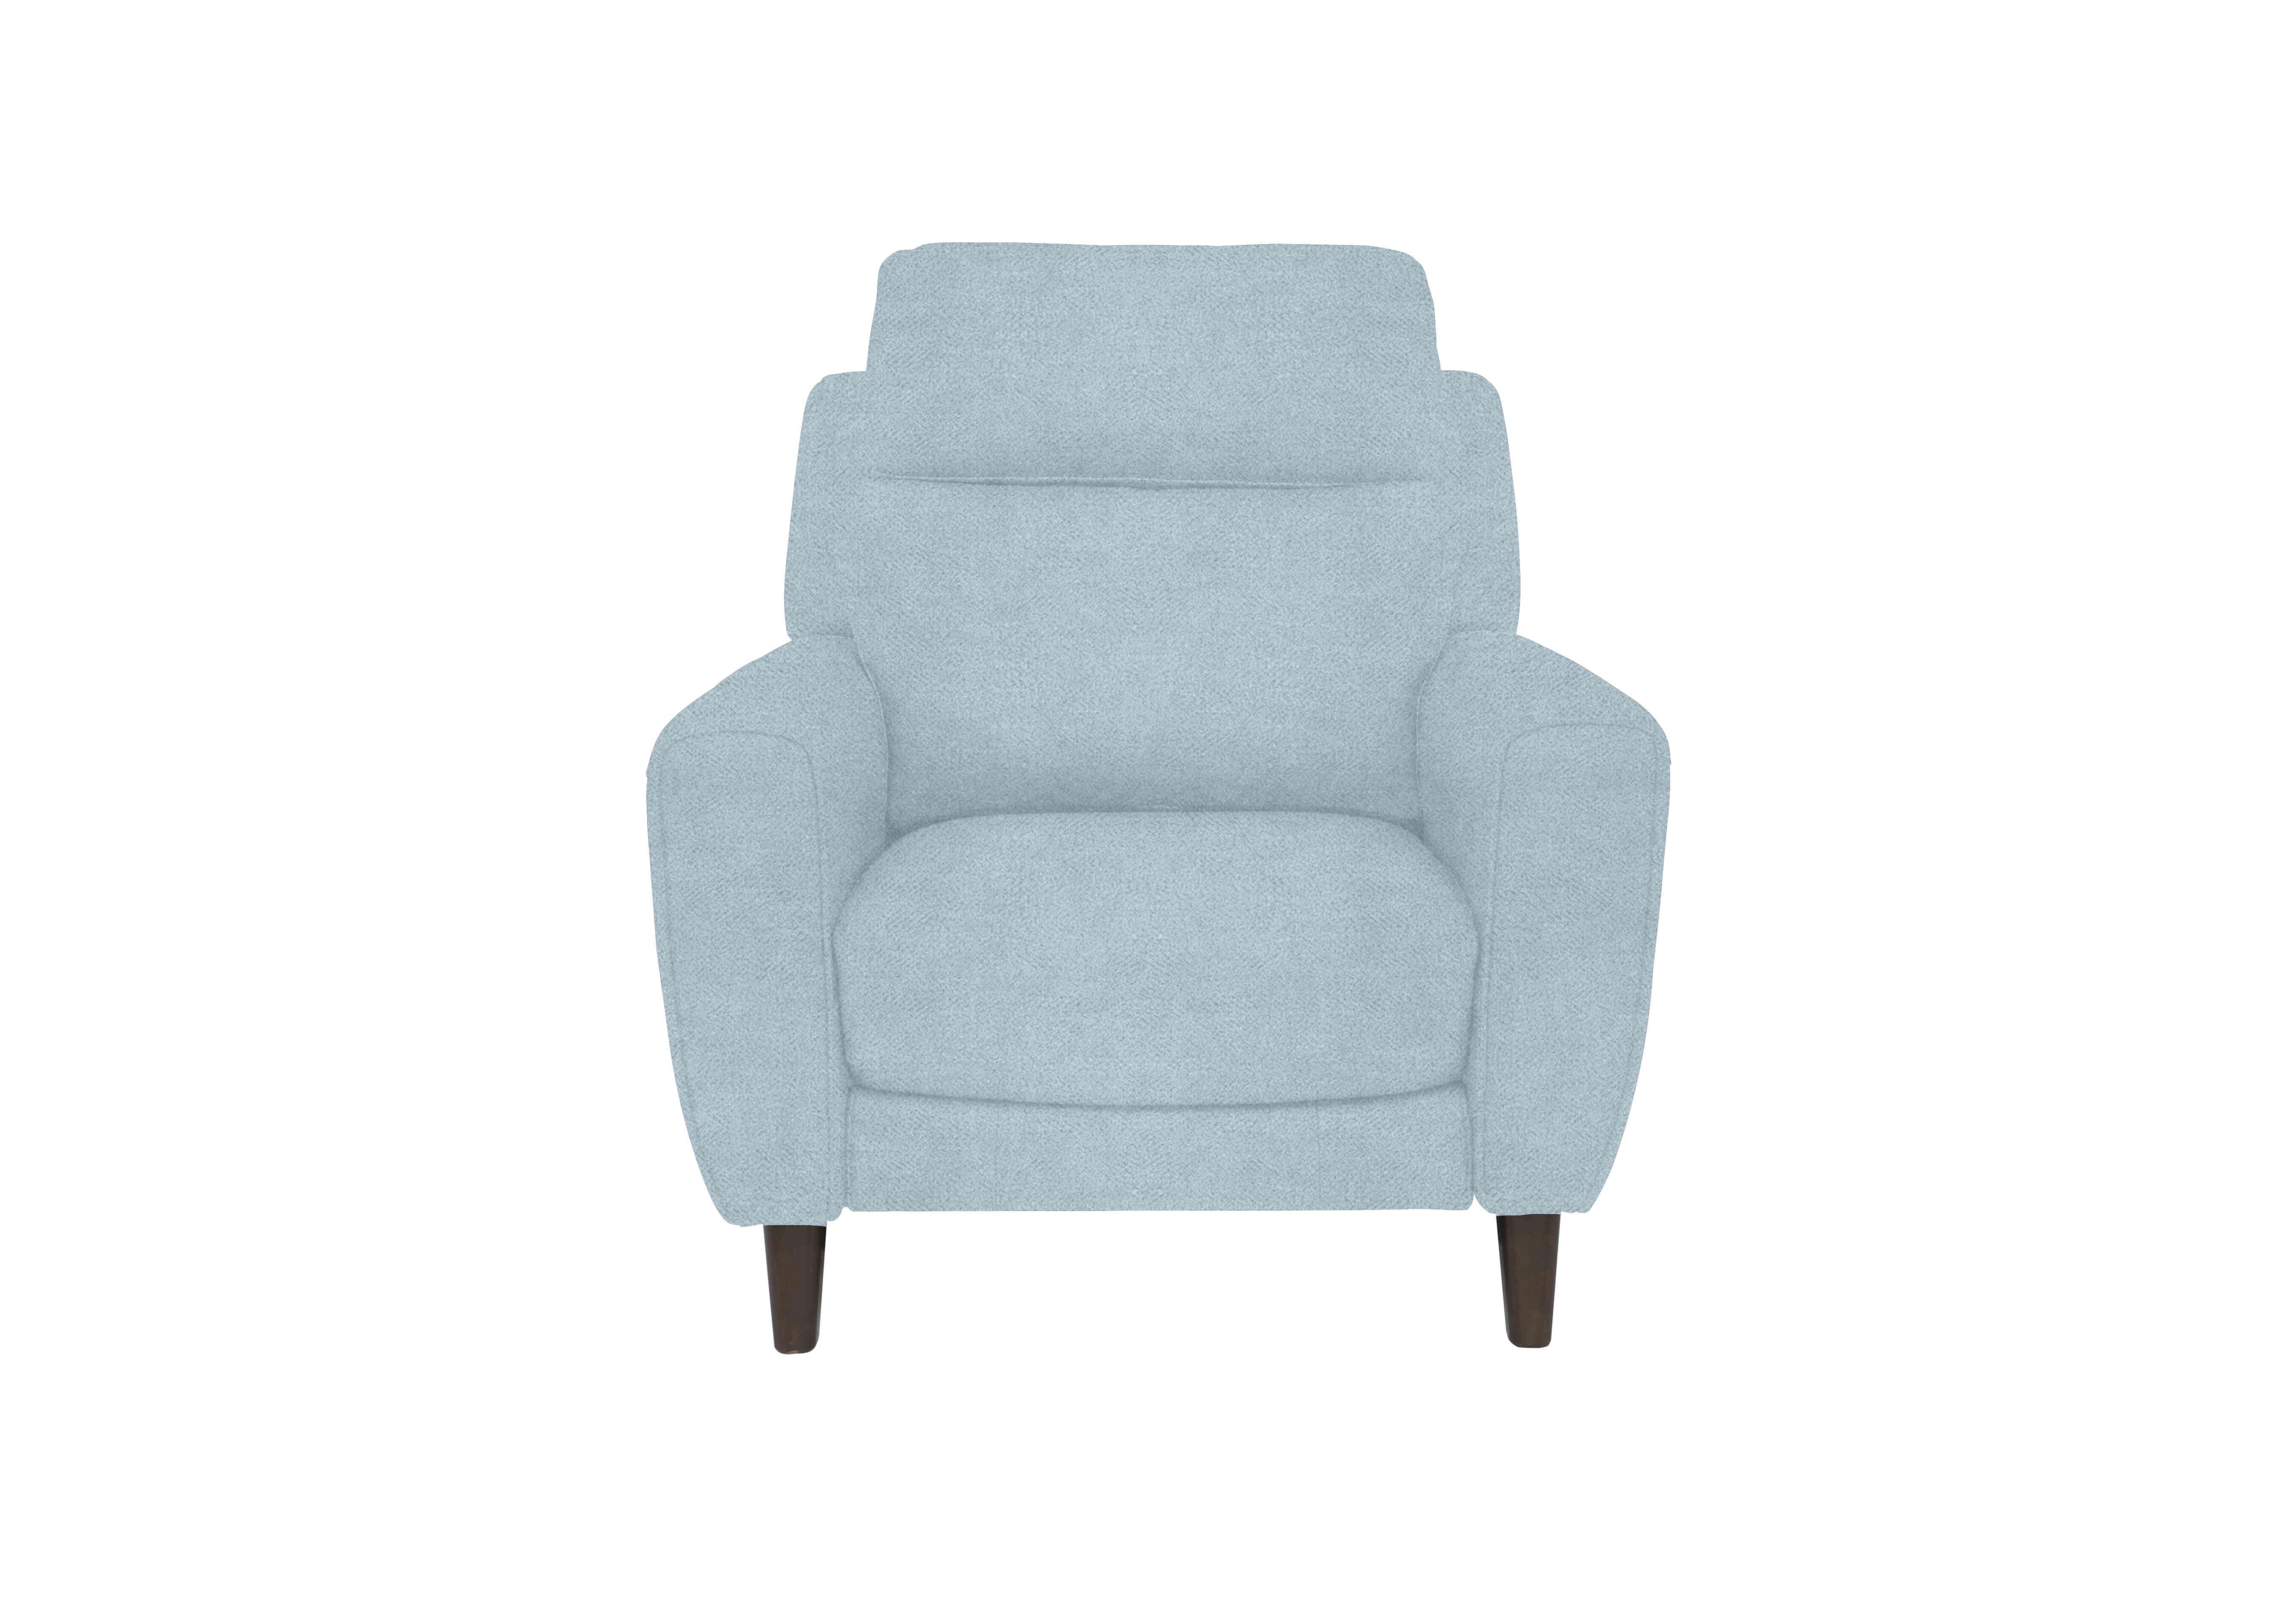 Zen Fabric Chair in Fab-Meo-R17 Baby Blue on Furniture Village